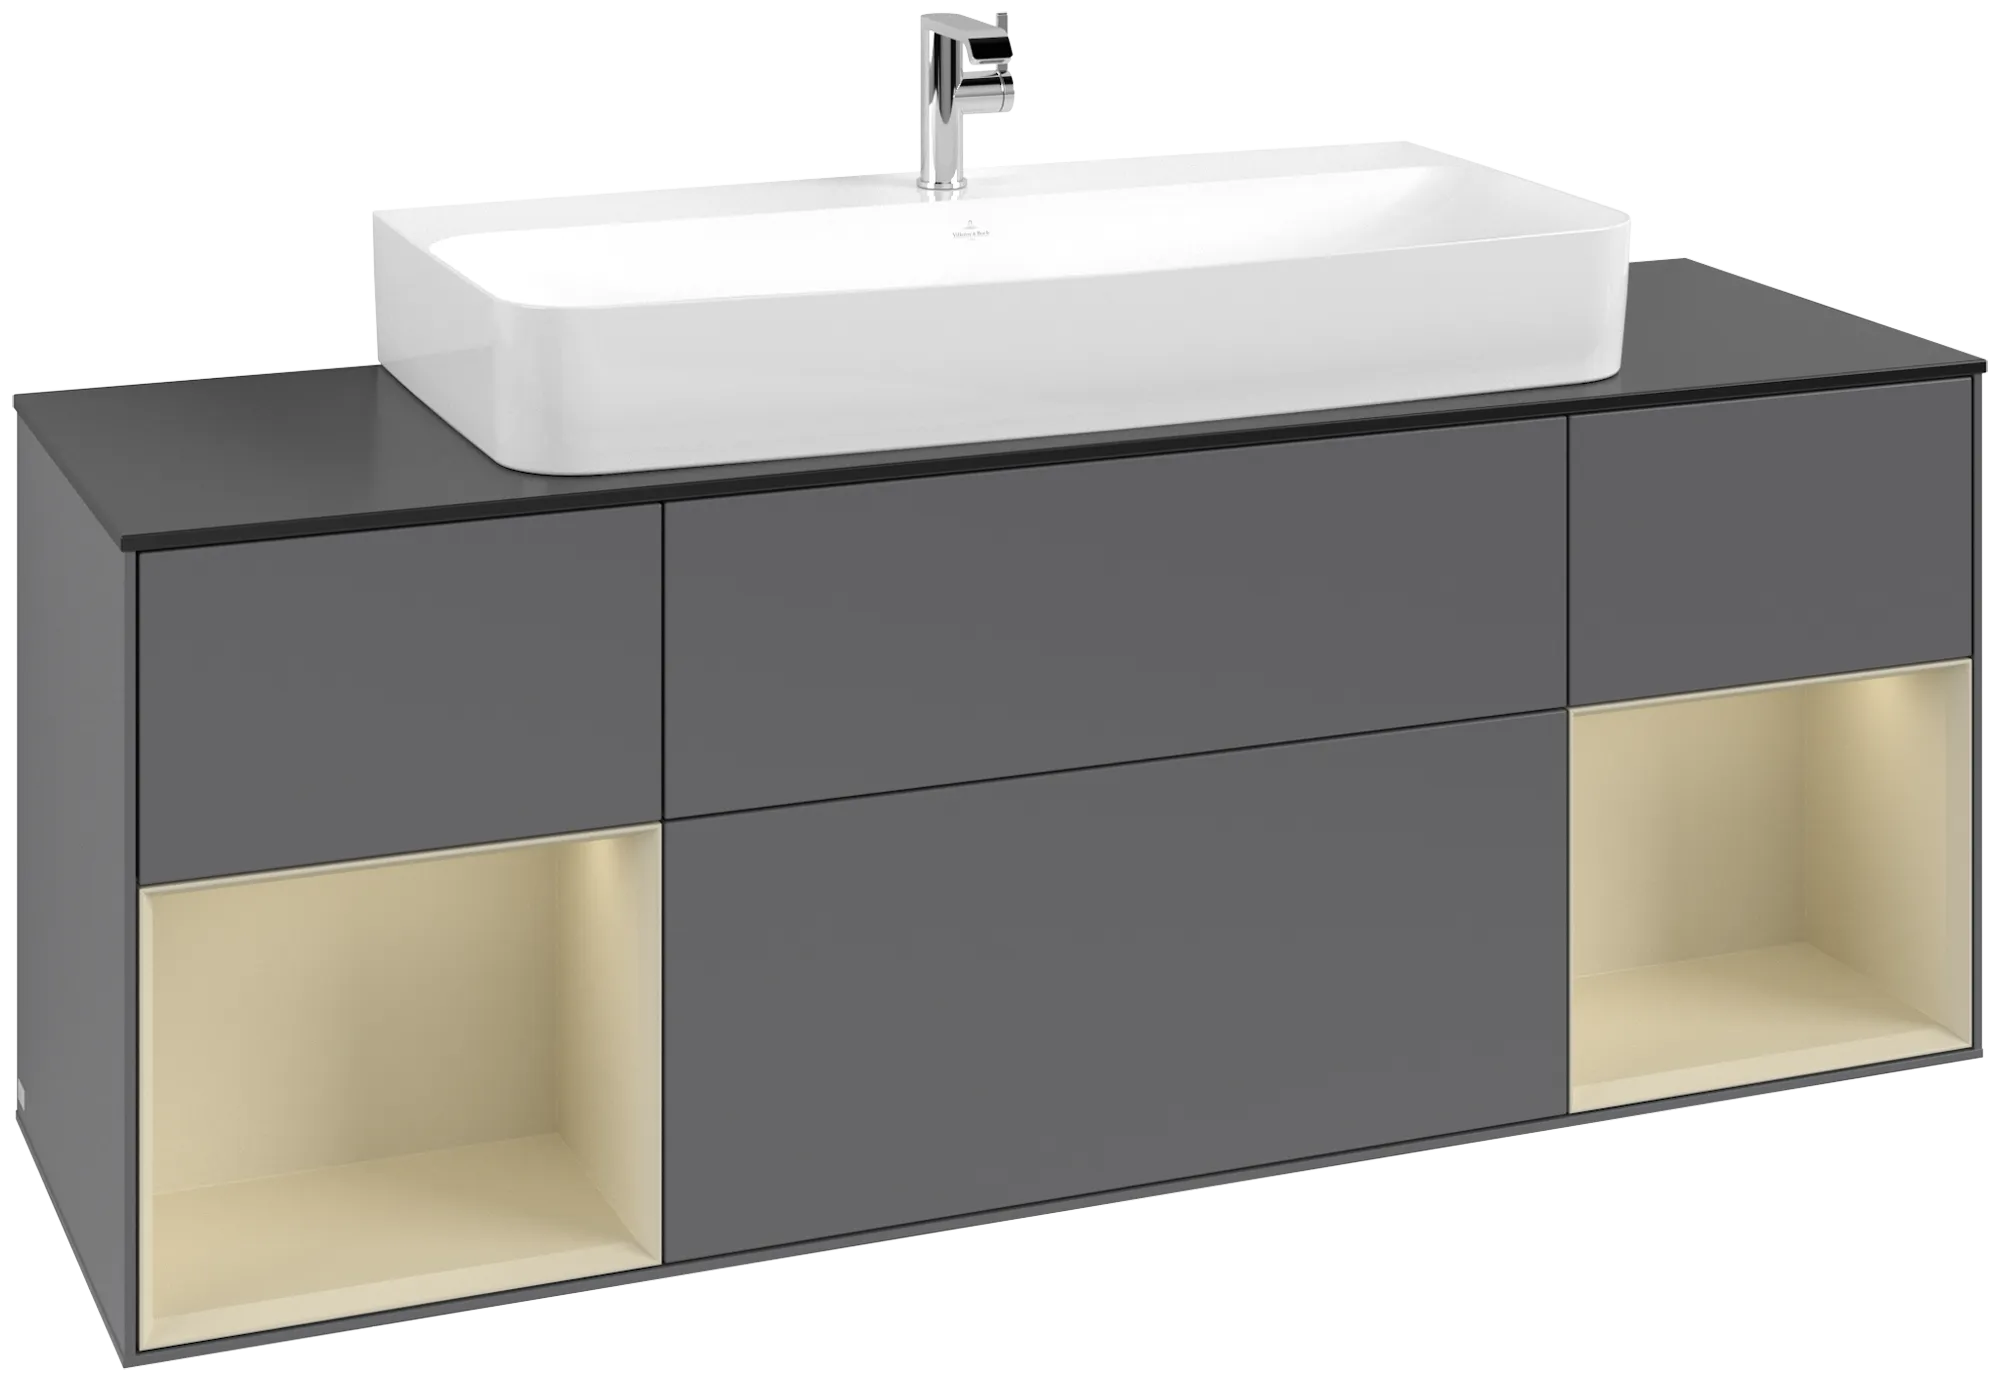 Picture of VILLEROY BOCH Finion Vanity unit, with lighting, 4 pull-out compartments, 1600 x 603 x 501 mm, Anthracite Matt Lacquer / Silk Grey Matt Lacquer / Glass Black Matt #G212HJGK